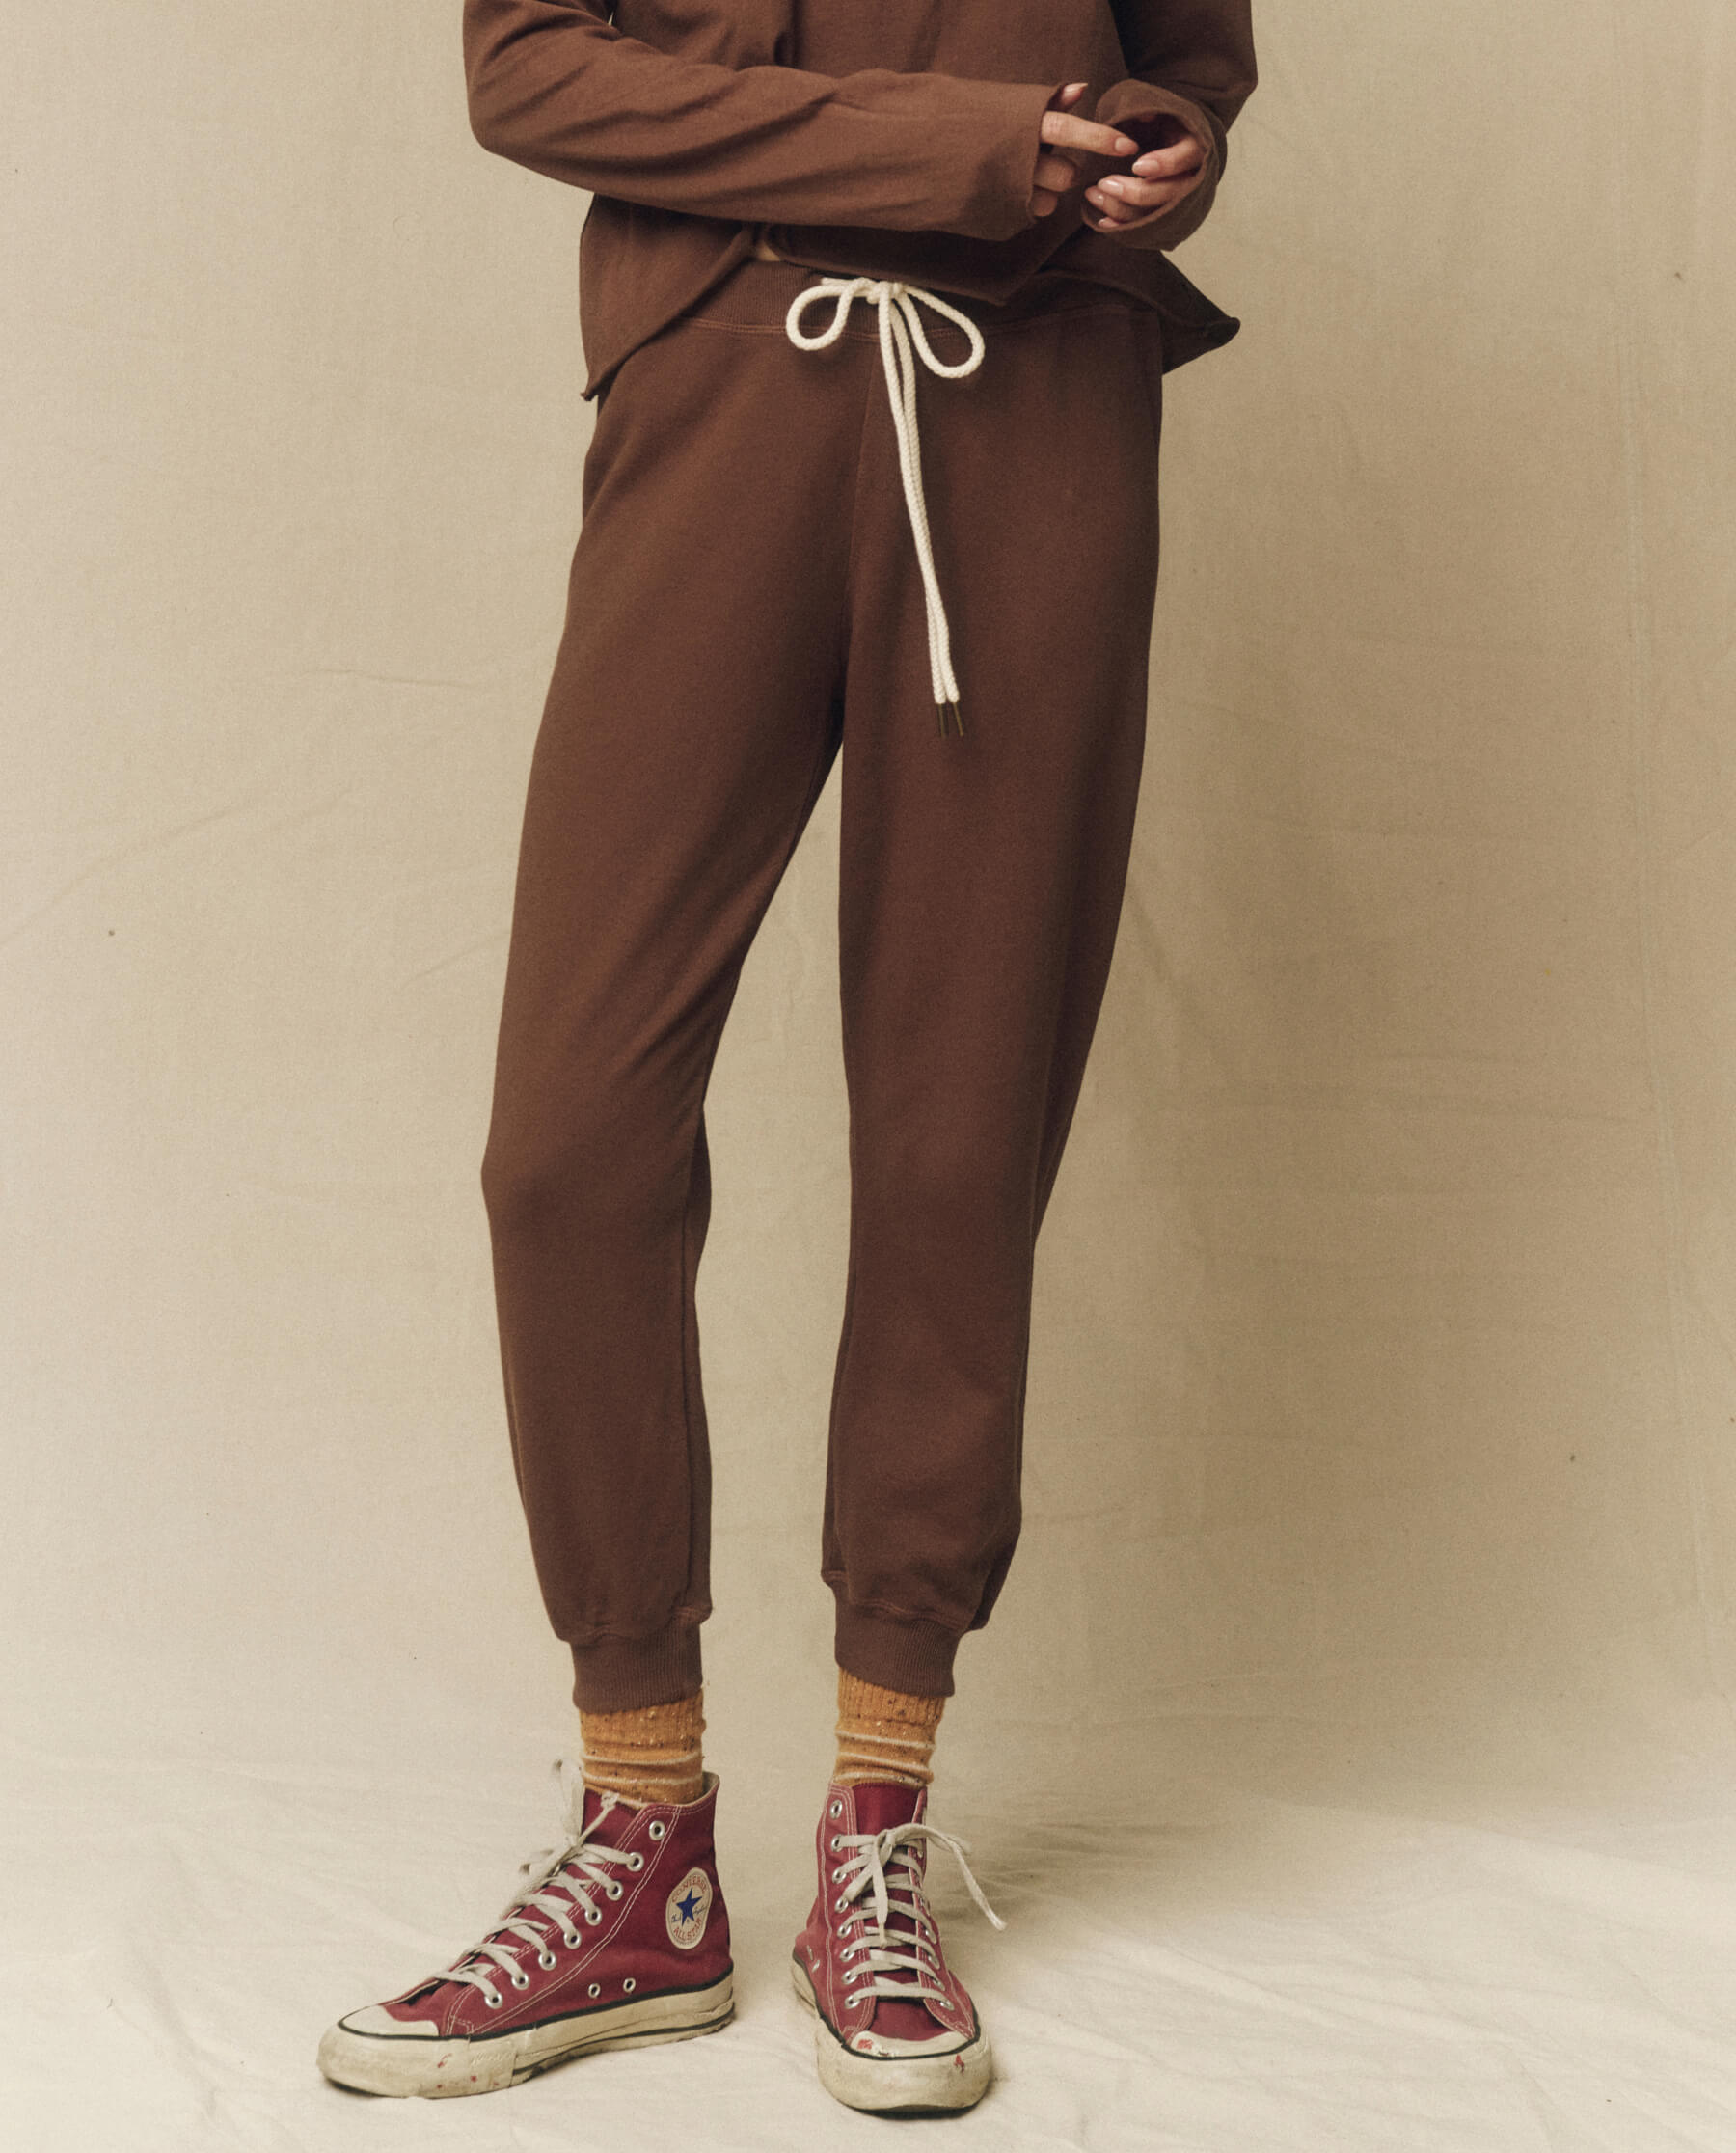 The Cropped Sweatpant. Solid -- Hickory